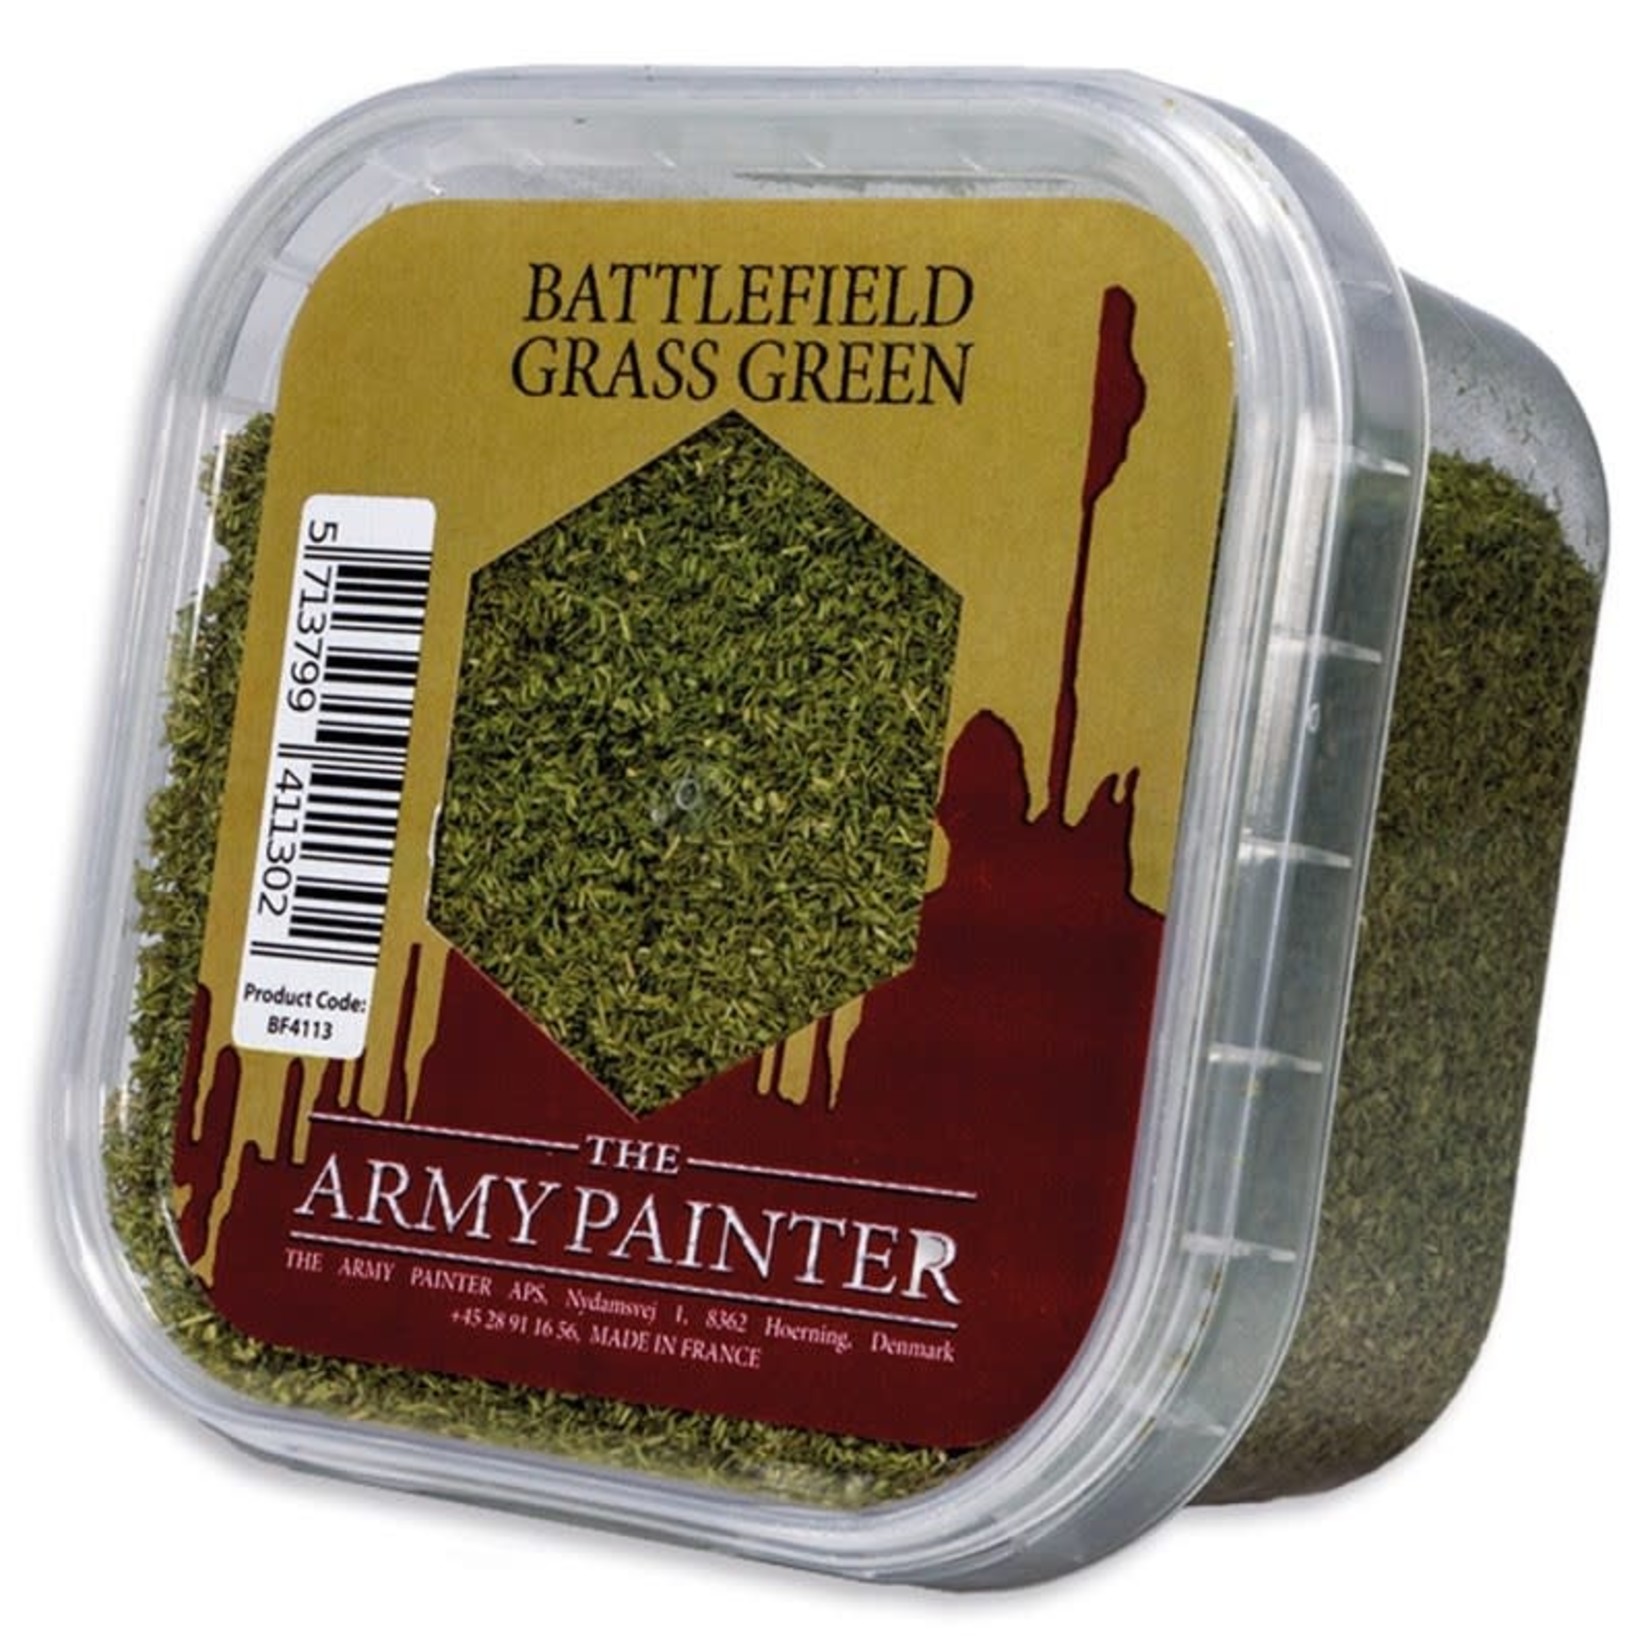 The Army Painter Grass Green